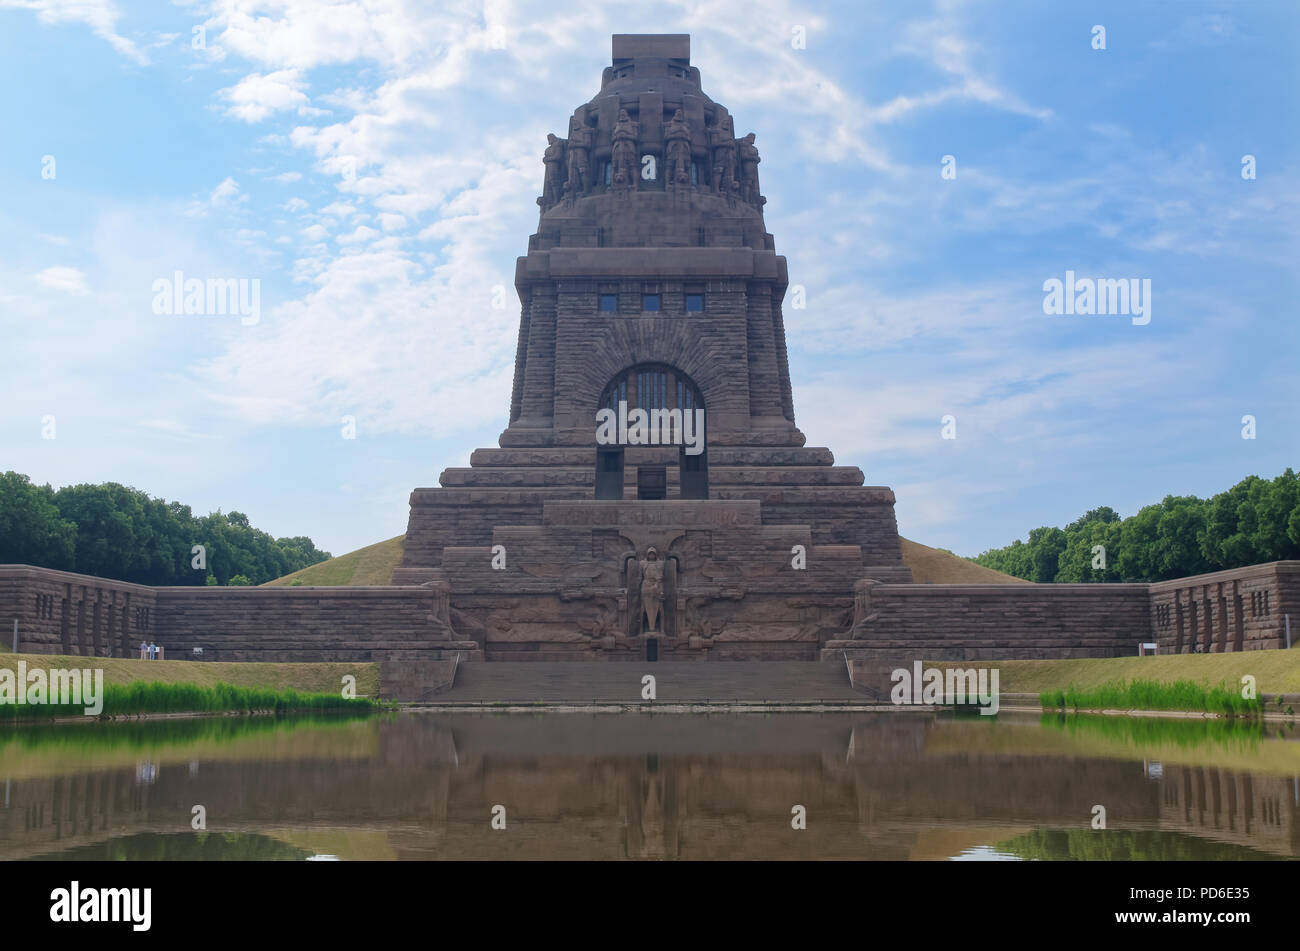 Monument to the Battle of the Nations (Das Völkerschlachtdenkmal) against blue cloudy sky, Leipzig, Germany. Designed by Bruno Schmitz Stock Photo